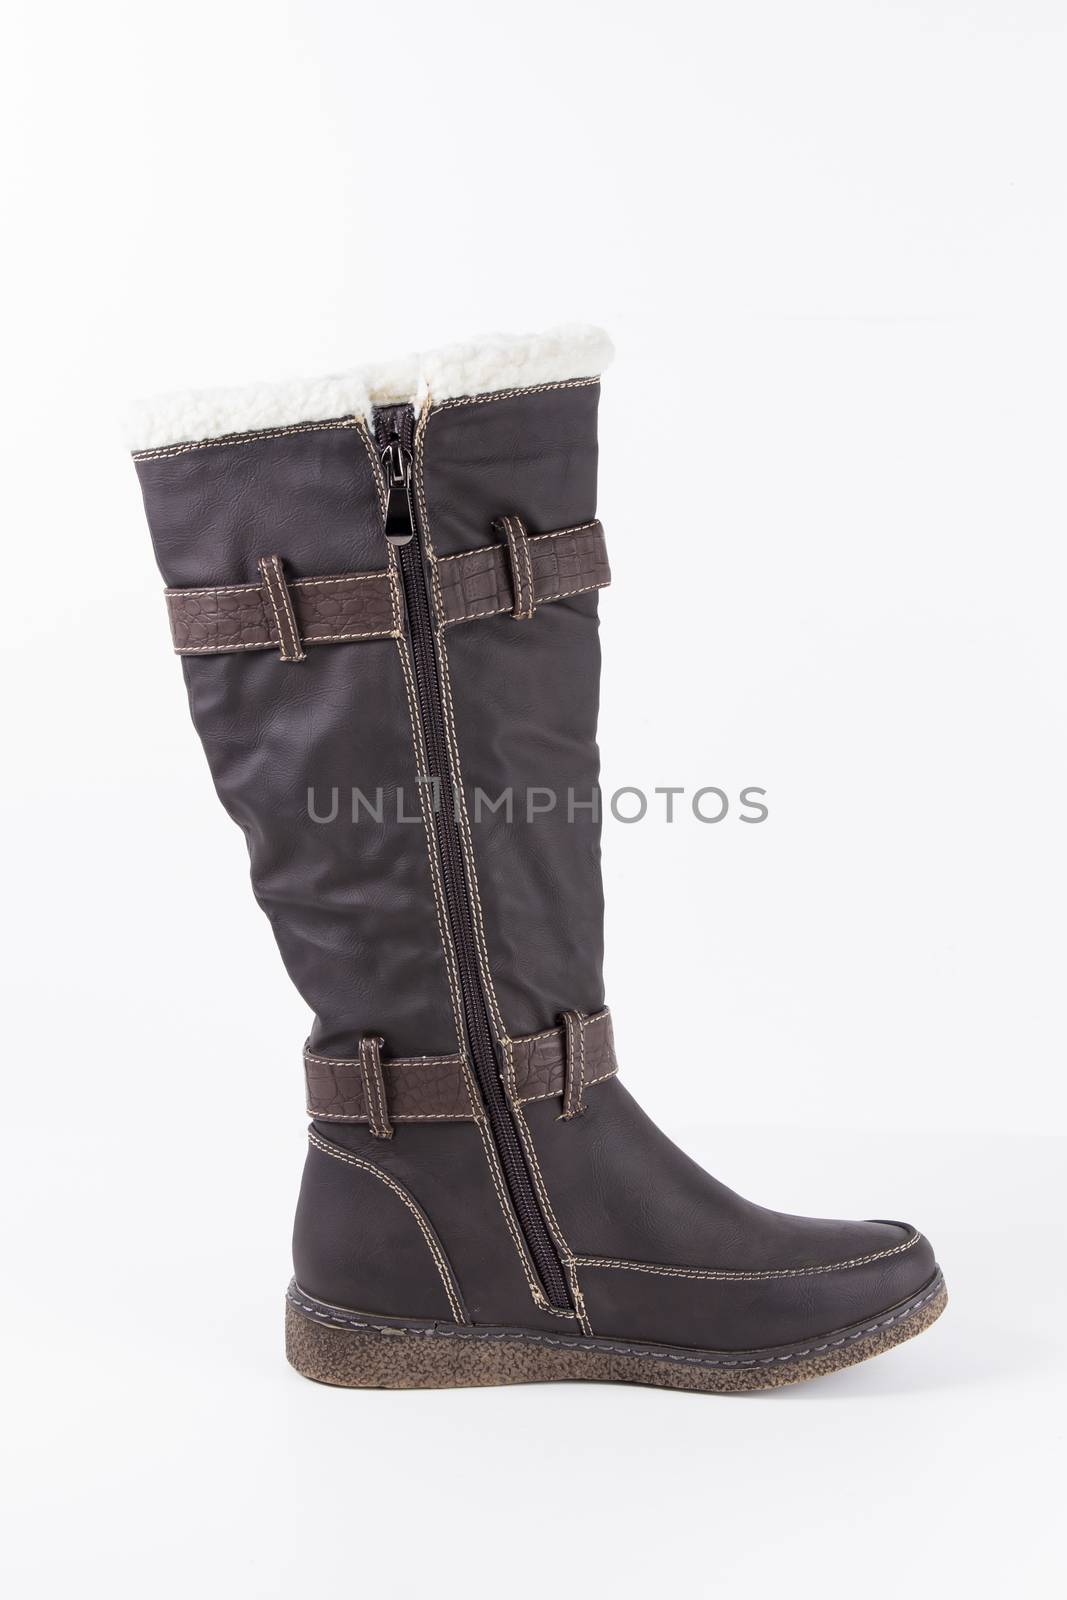 Brown leather boots on white background, isolated product.